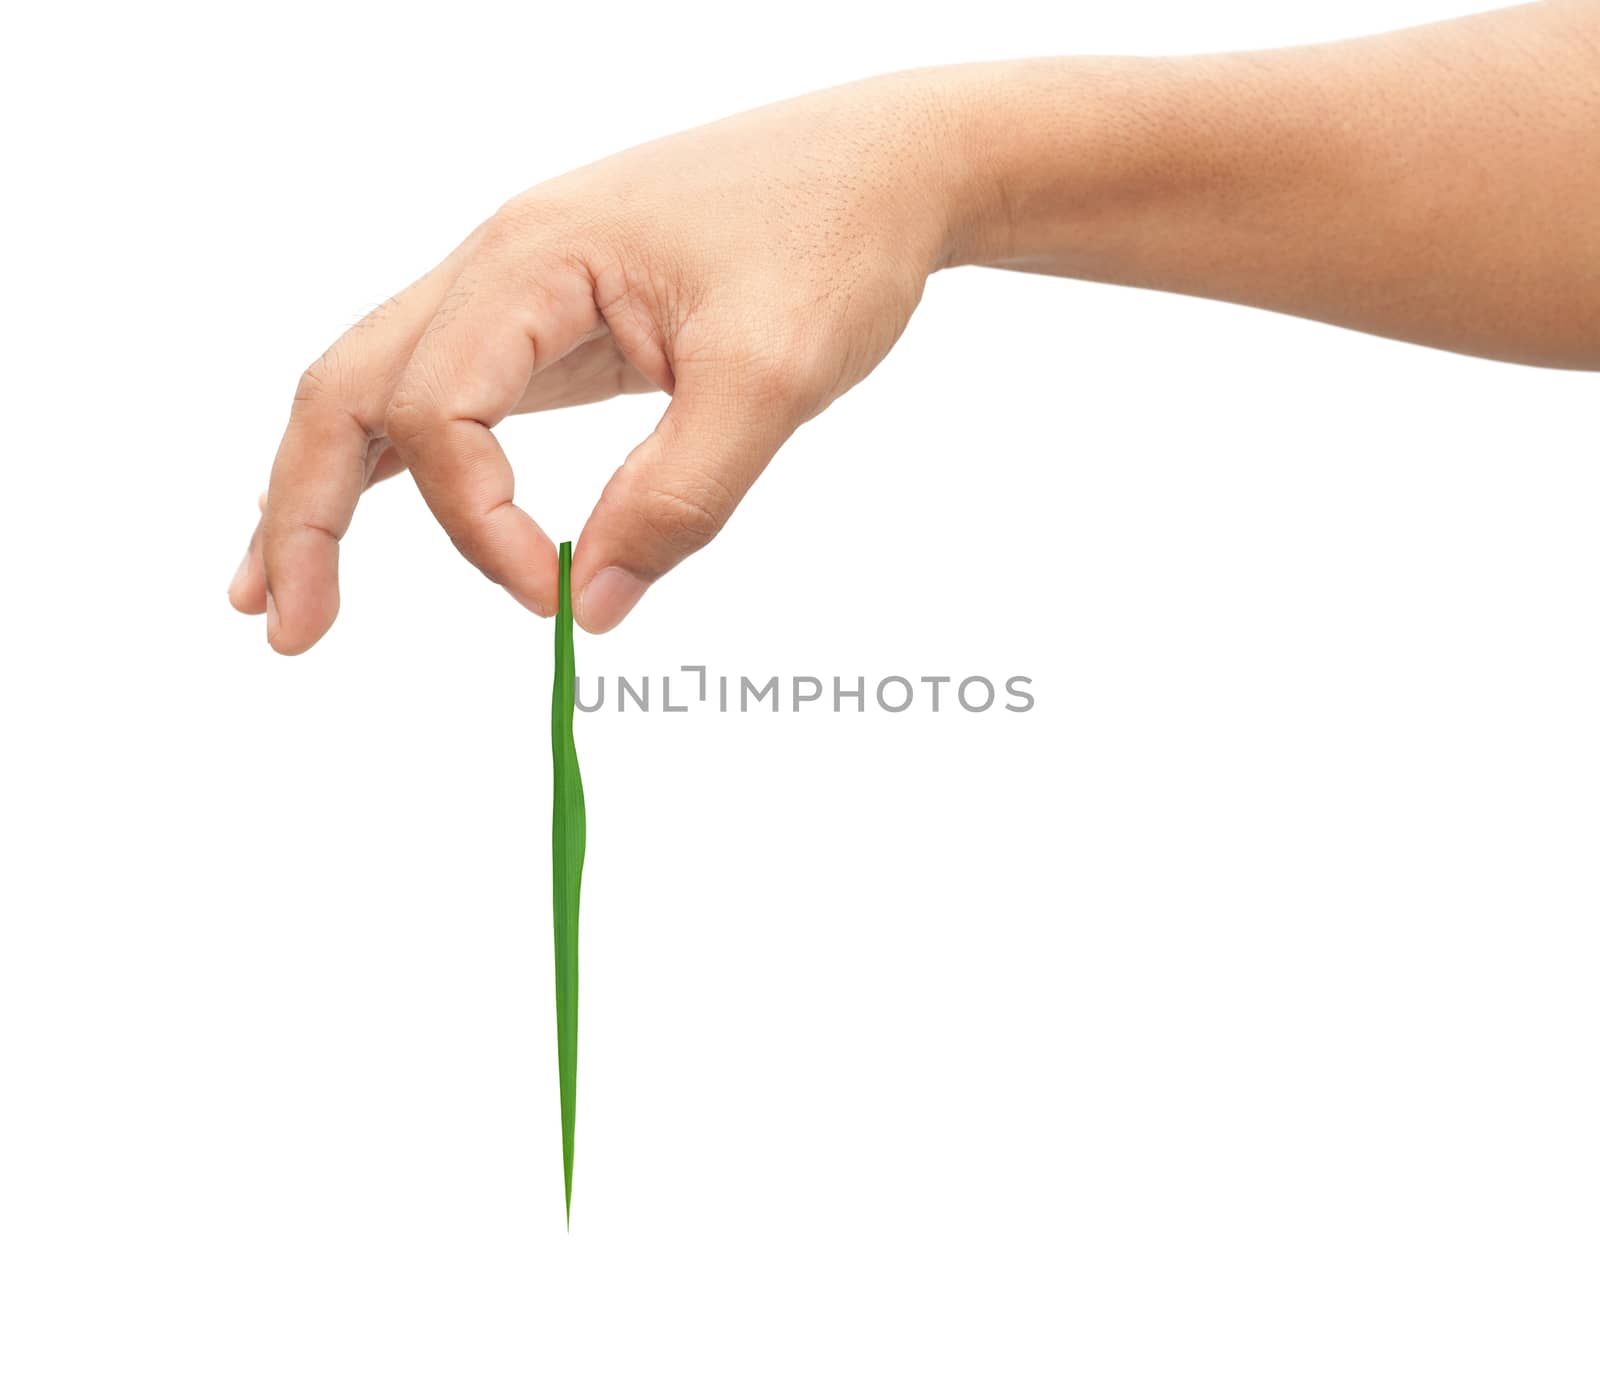 Adult man hand holding grass by foto76